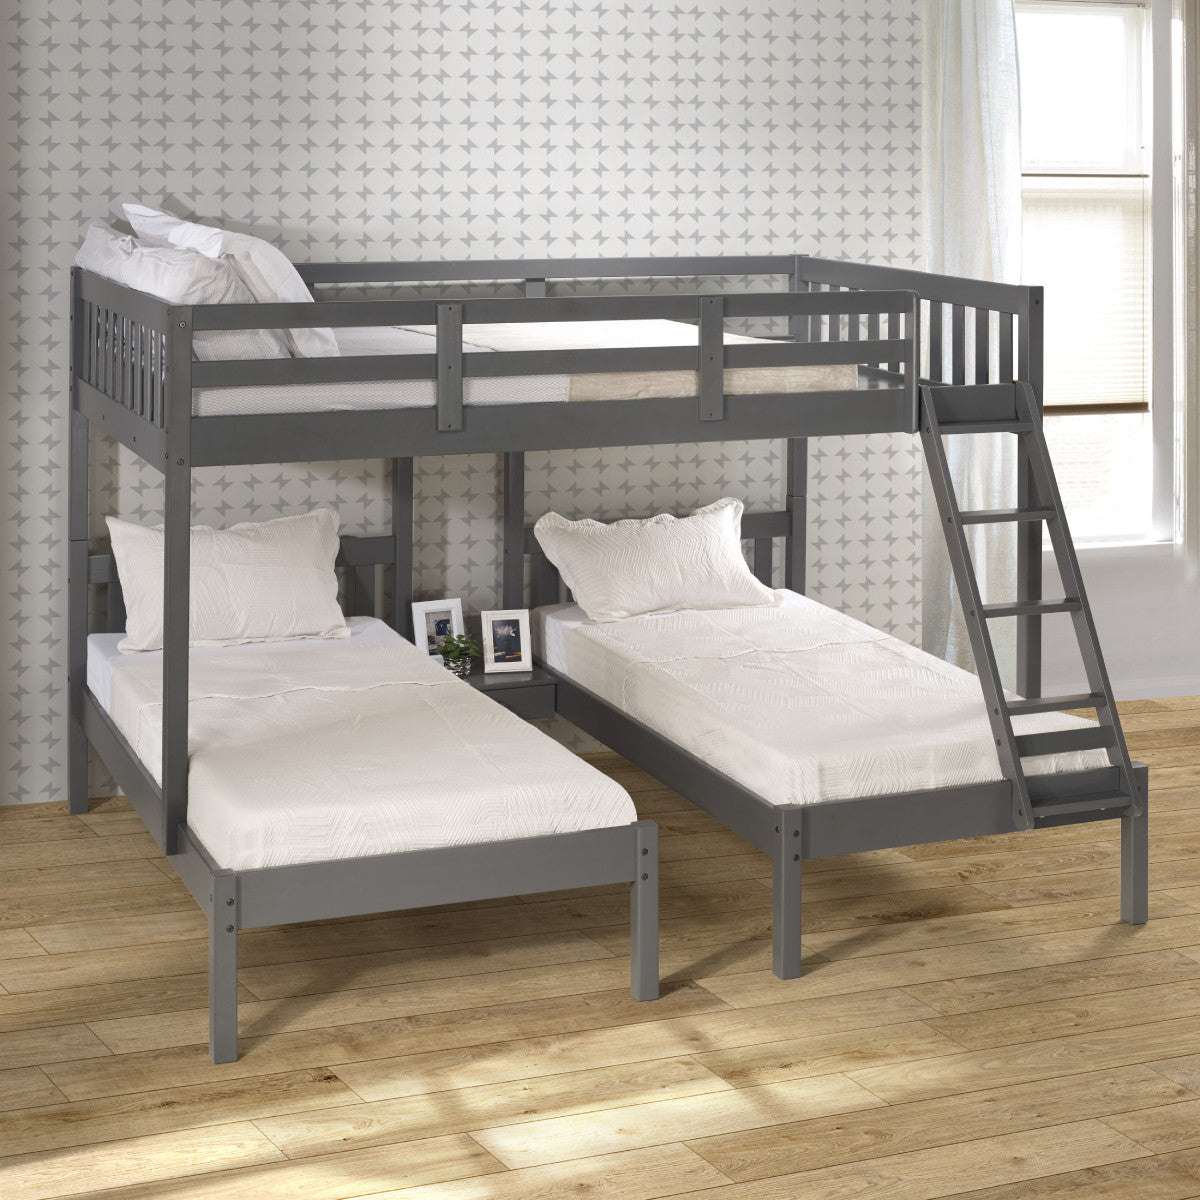 FULL OVER DOUBLE TWIN BED LOFT BUNK IN DARK GREY FINISH